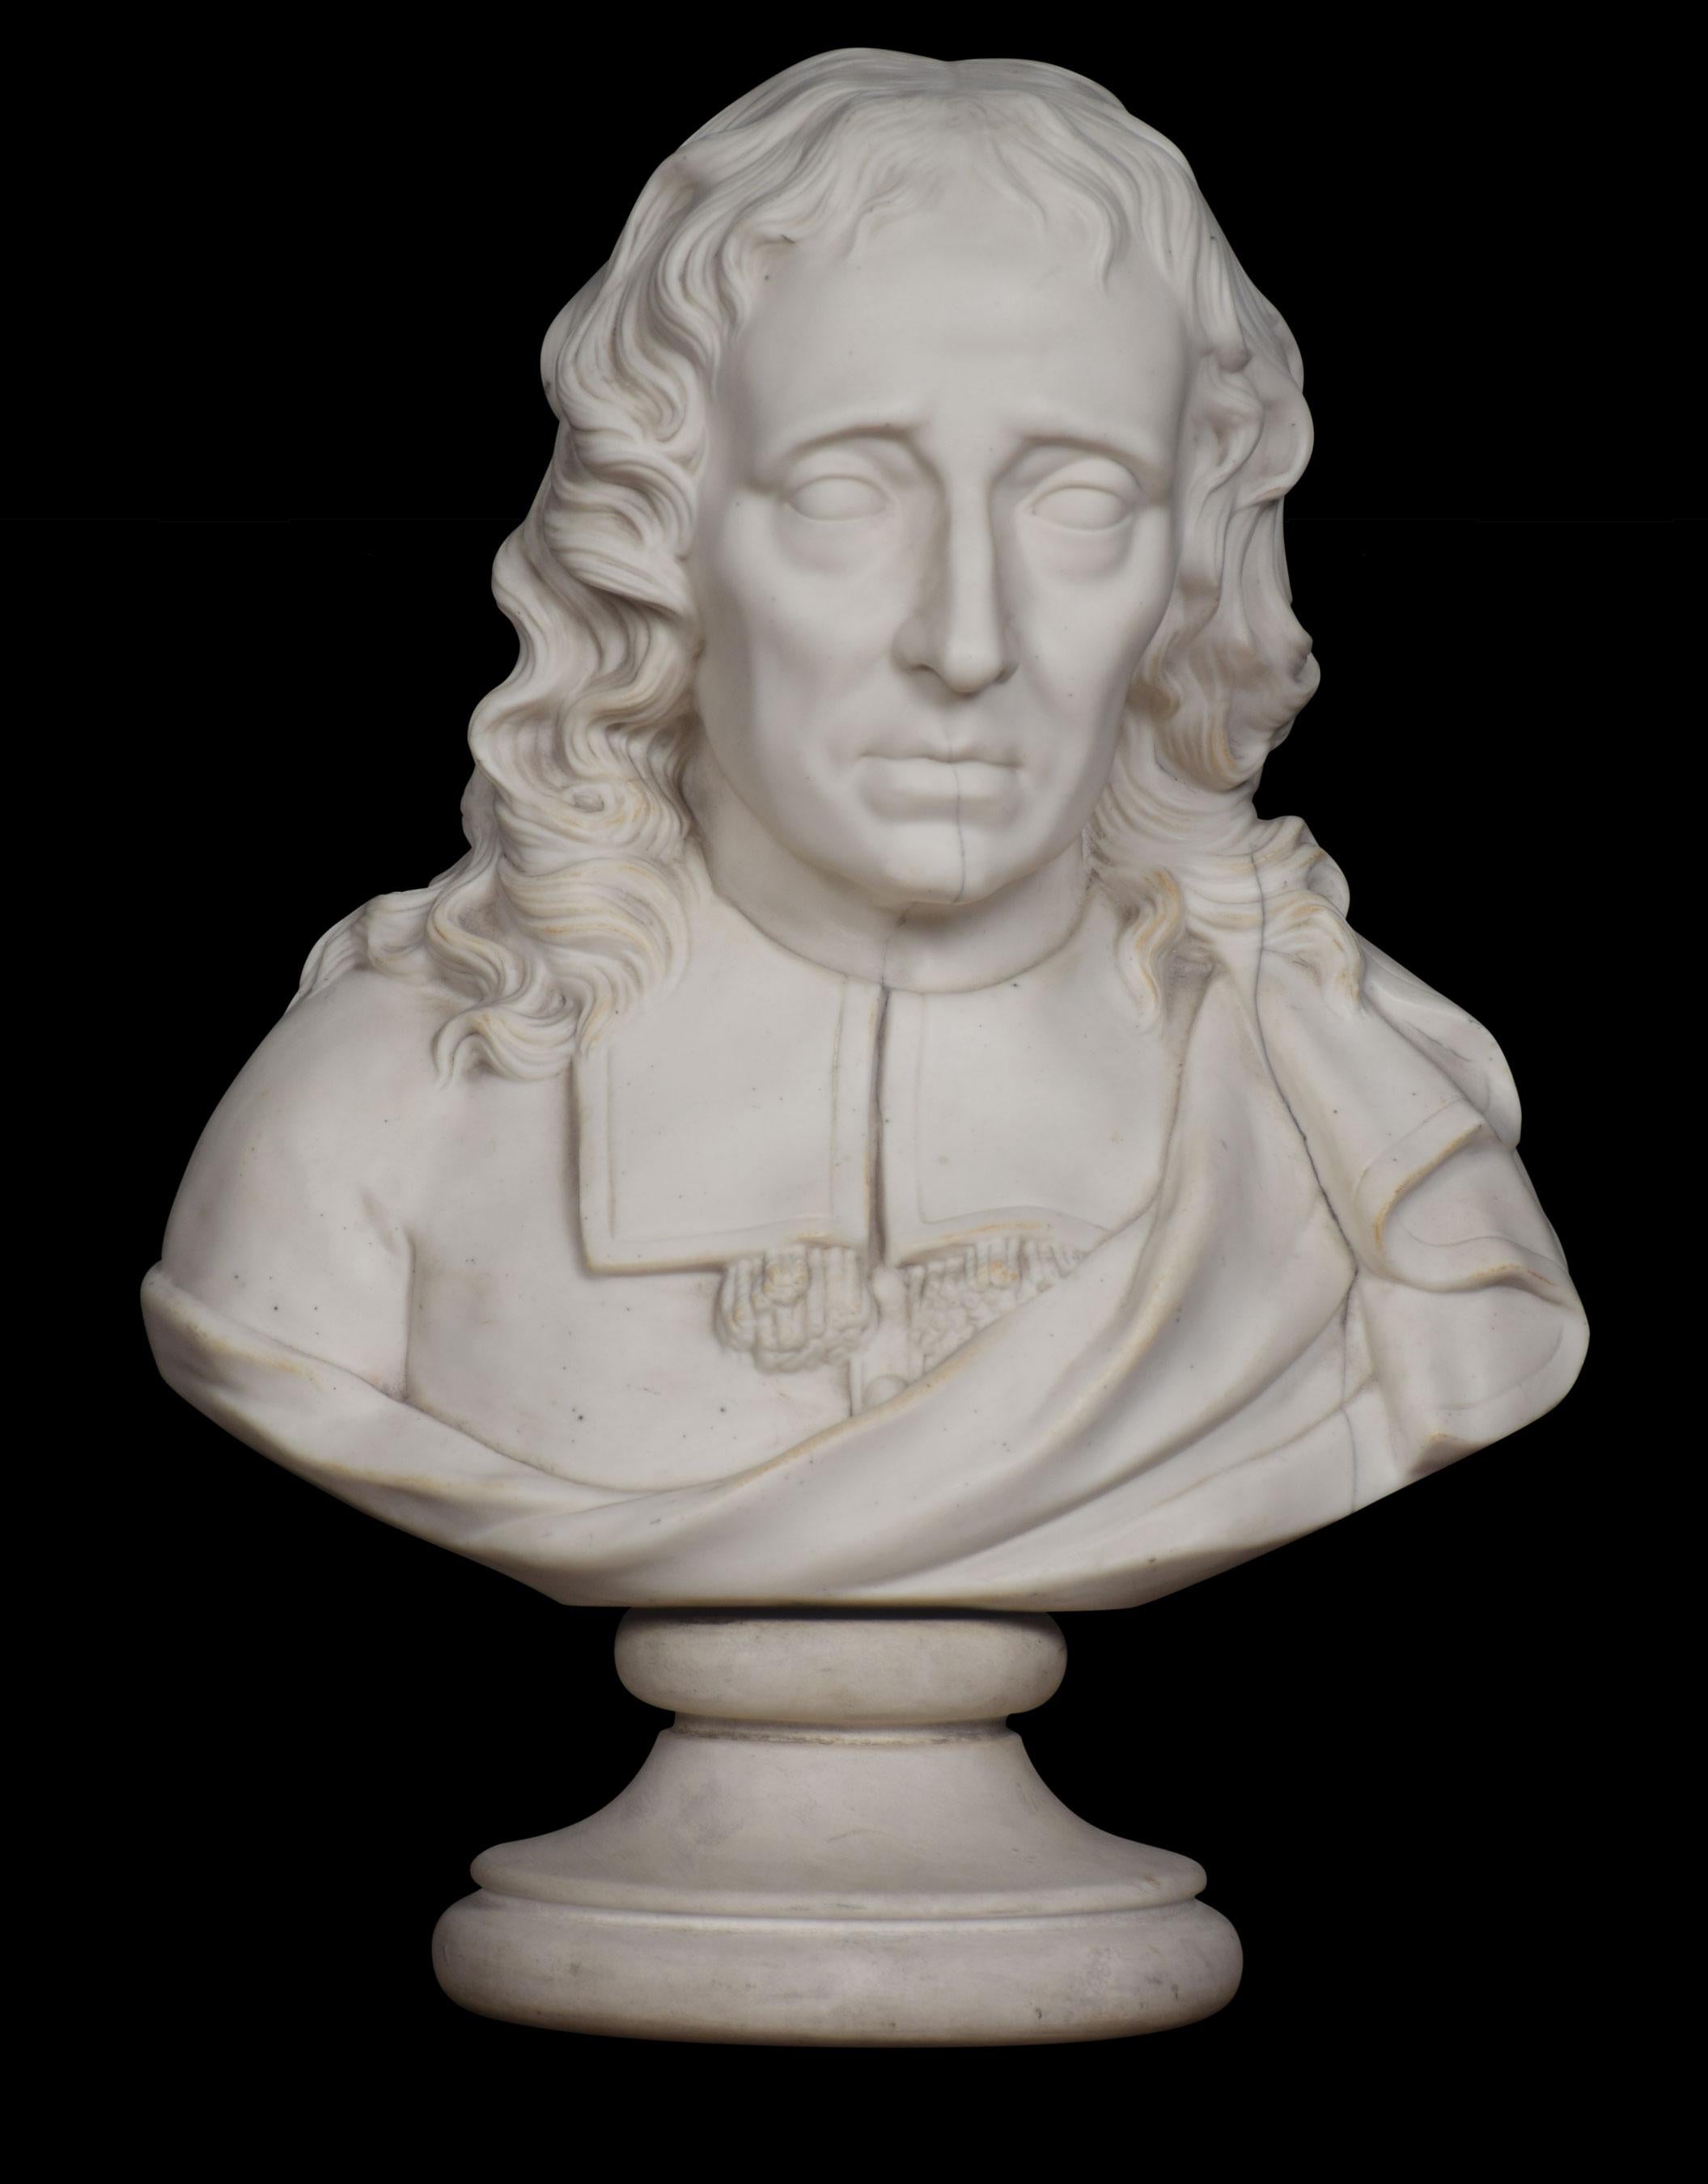 19th century John Milton Parian ware bust raised on a circular pedestal base.
Dimensions:
Height 15.5 inches
Width 12 inches
Depth 7.5 inches.